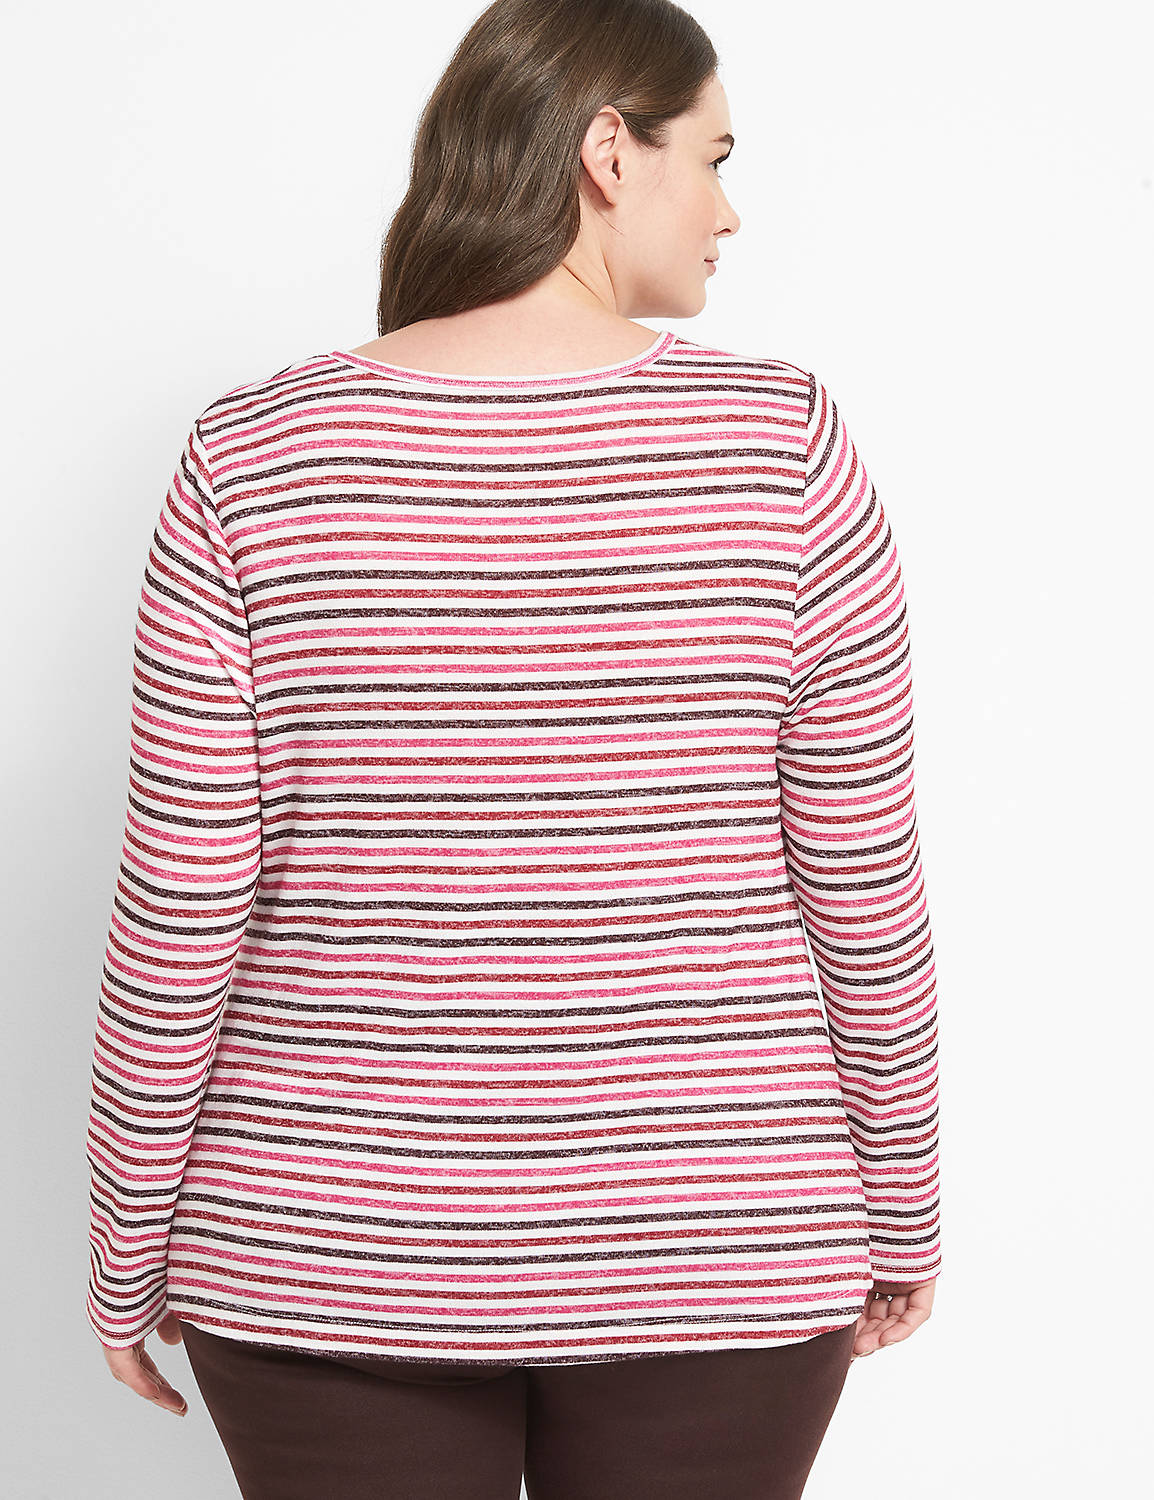 Long Sleeve Notch Neck Swing Tee Print 1123731:LBH21149_VailStripeTwoWay_V2_CW9:10/12 Product Image 2